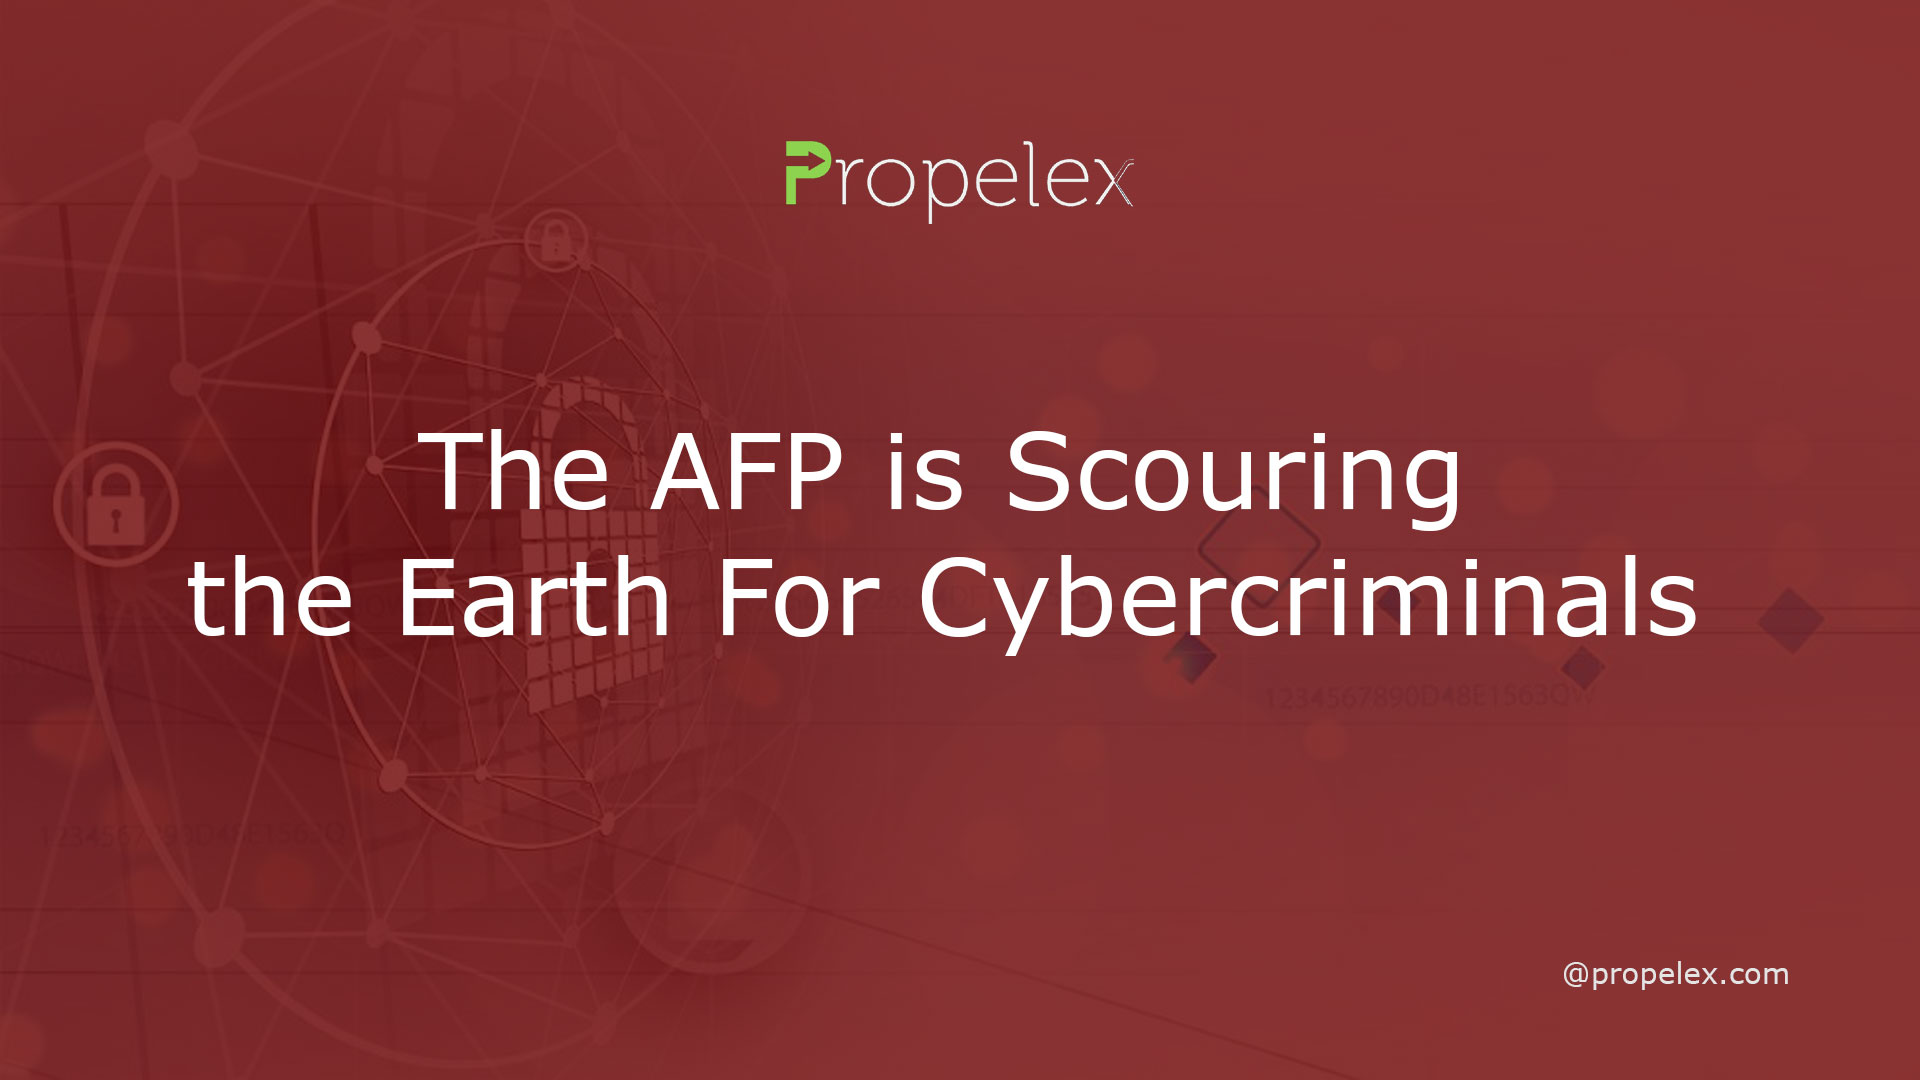 The AFP is Scouring the Earth For Cybercriminals